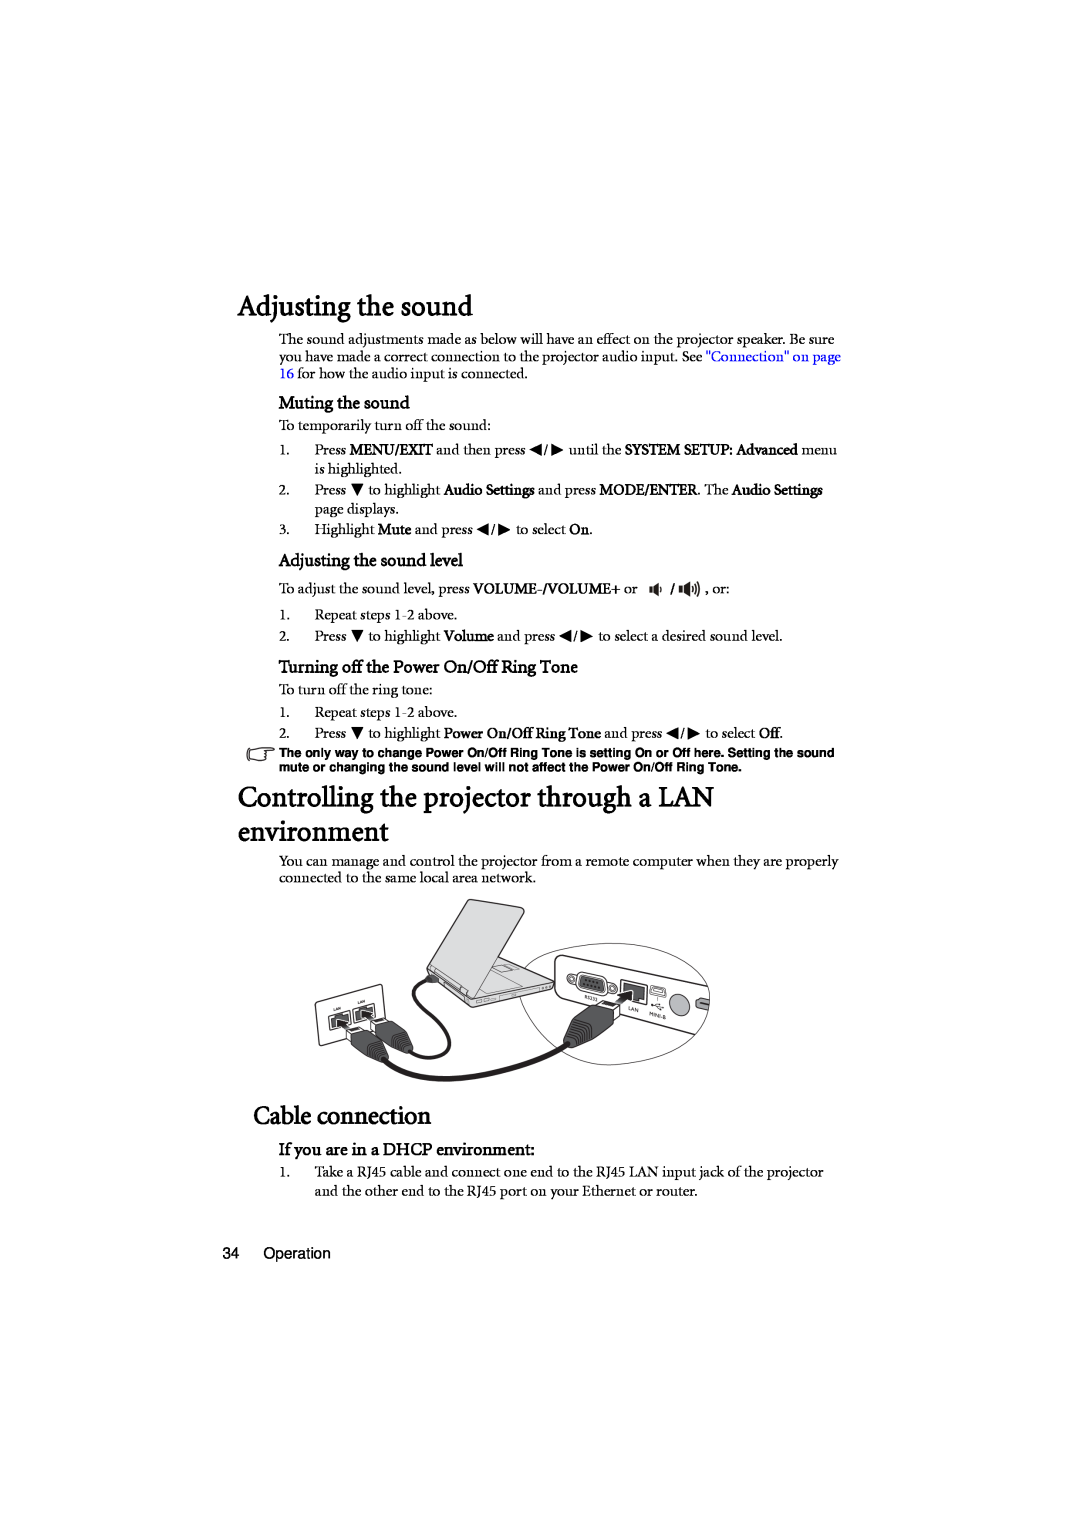 BenQ MX701 user manual Adjusting the sound, Cable connection 